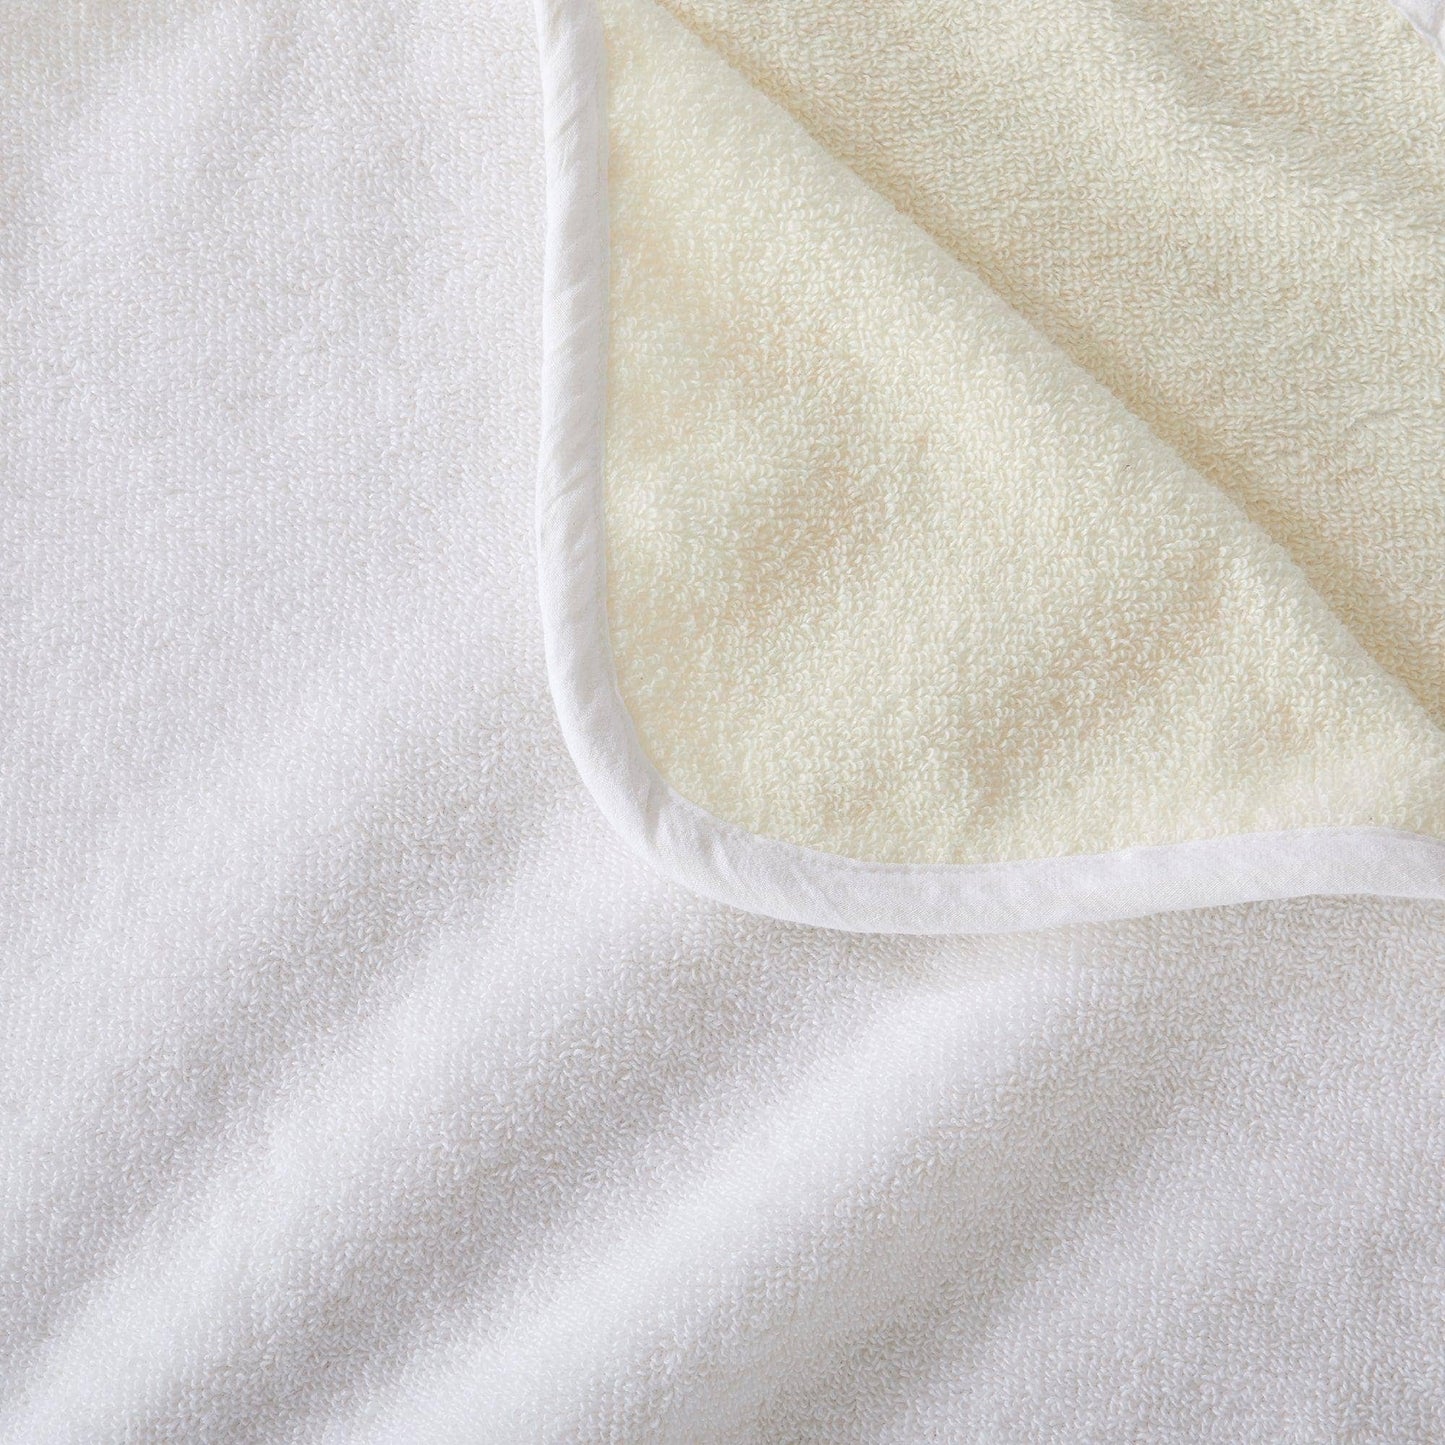 Two-Toned Spa Hand Towel